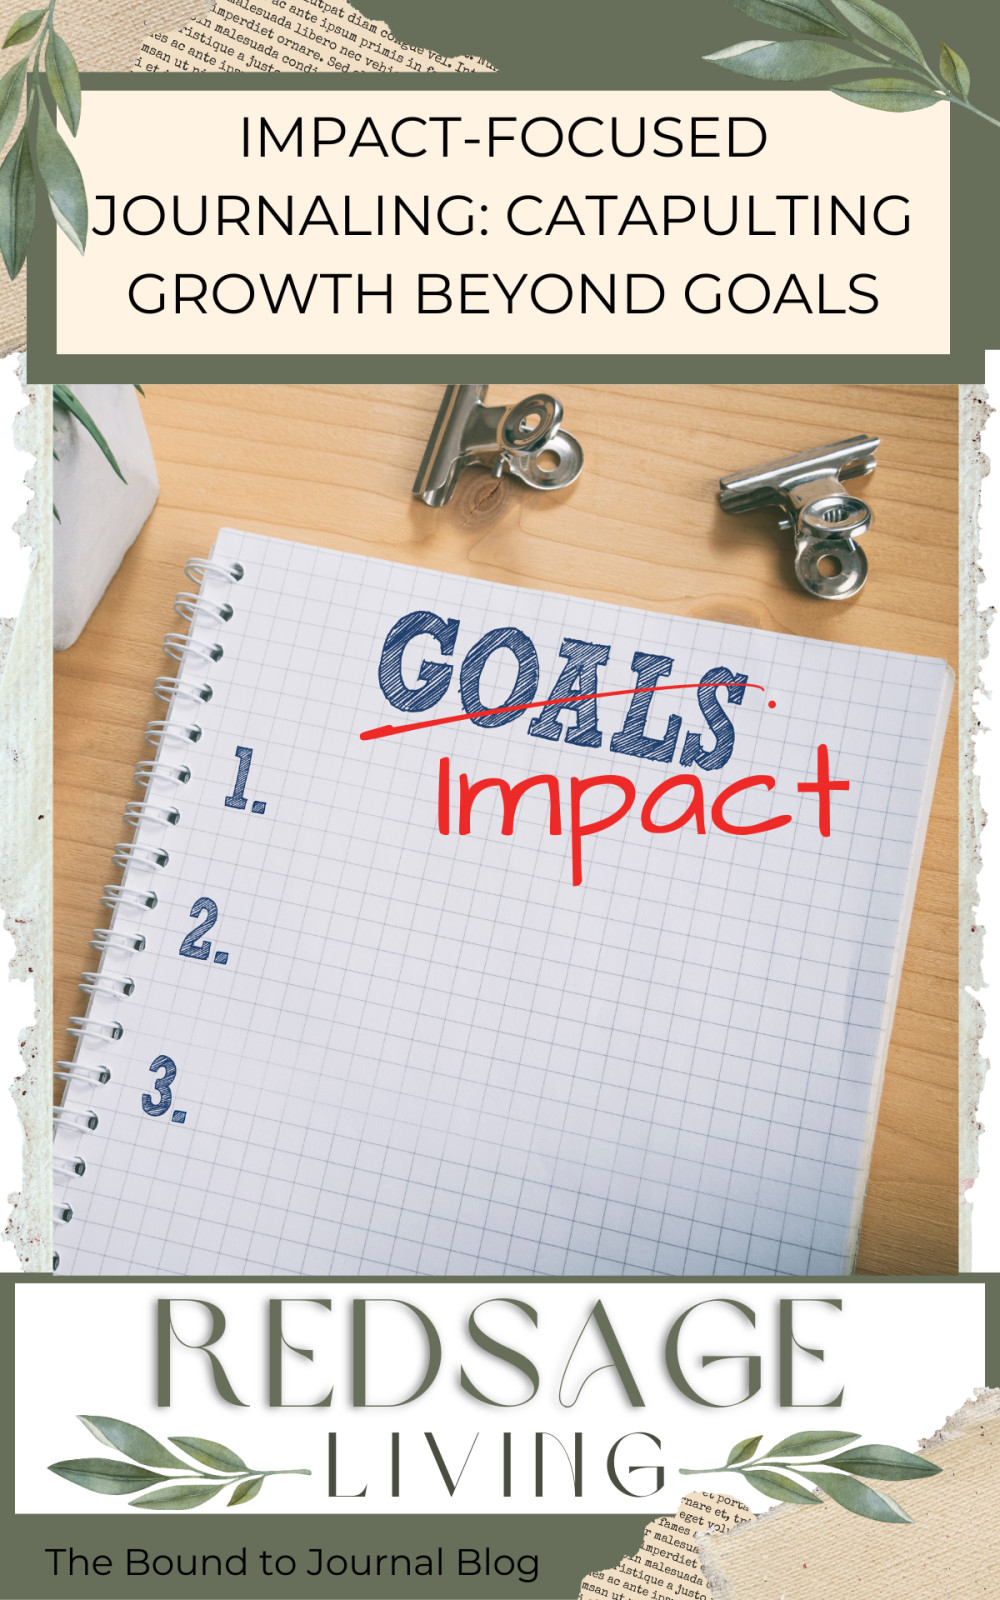 Impact-Focused Journaling: Catapulting Growth Beyond Goals